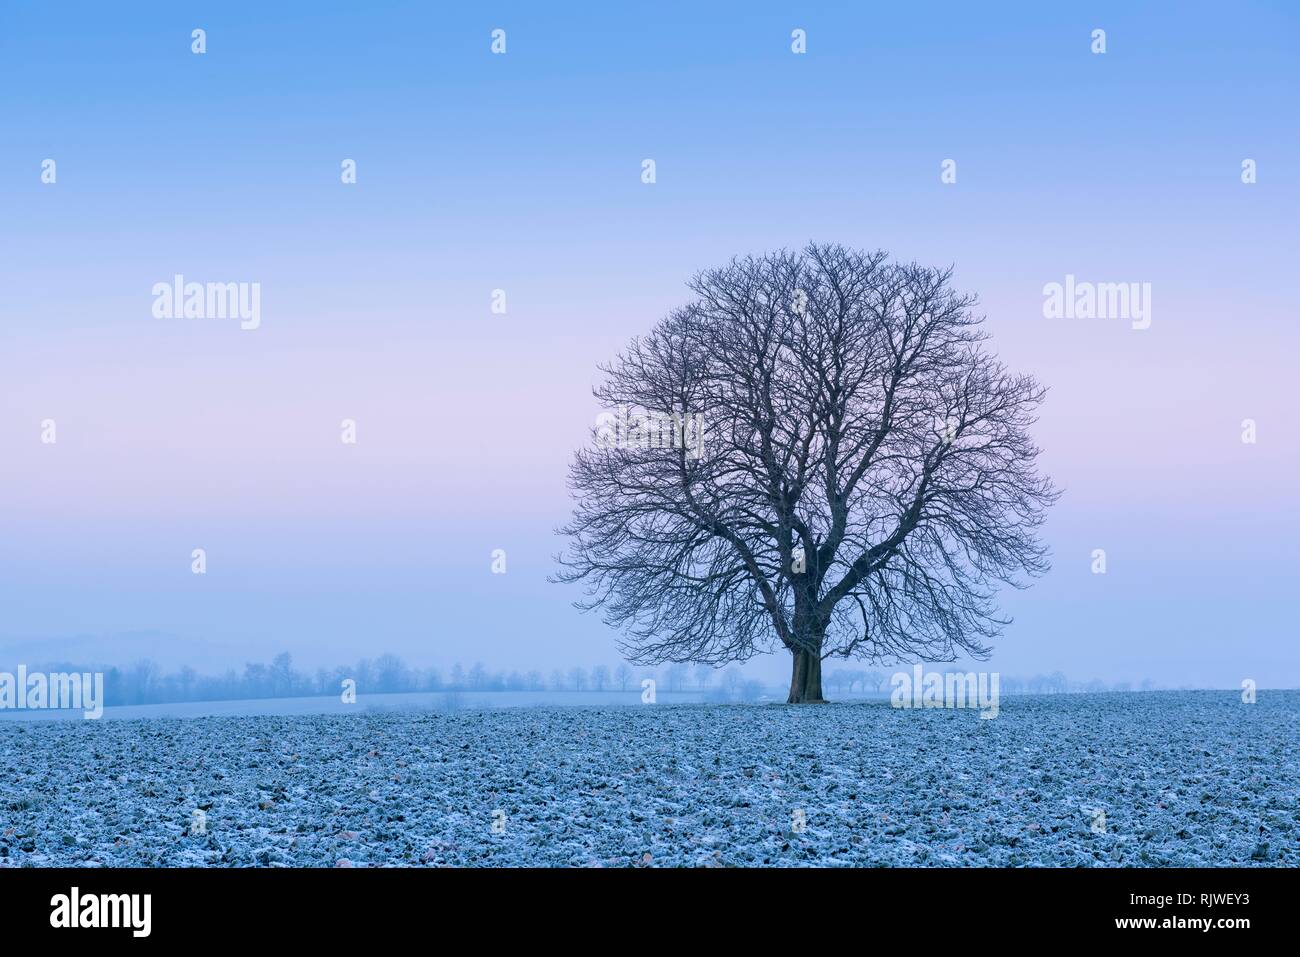 Cold winter morning, Horse chestnut (Aesculus hippocastanum) on field with Rape (Brassica napus) Winter seed, hoarfrost Stock Photo